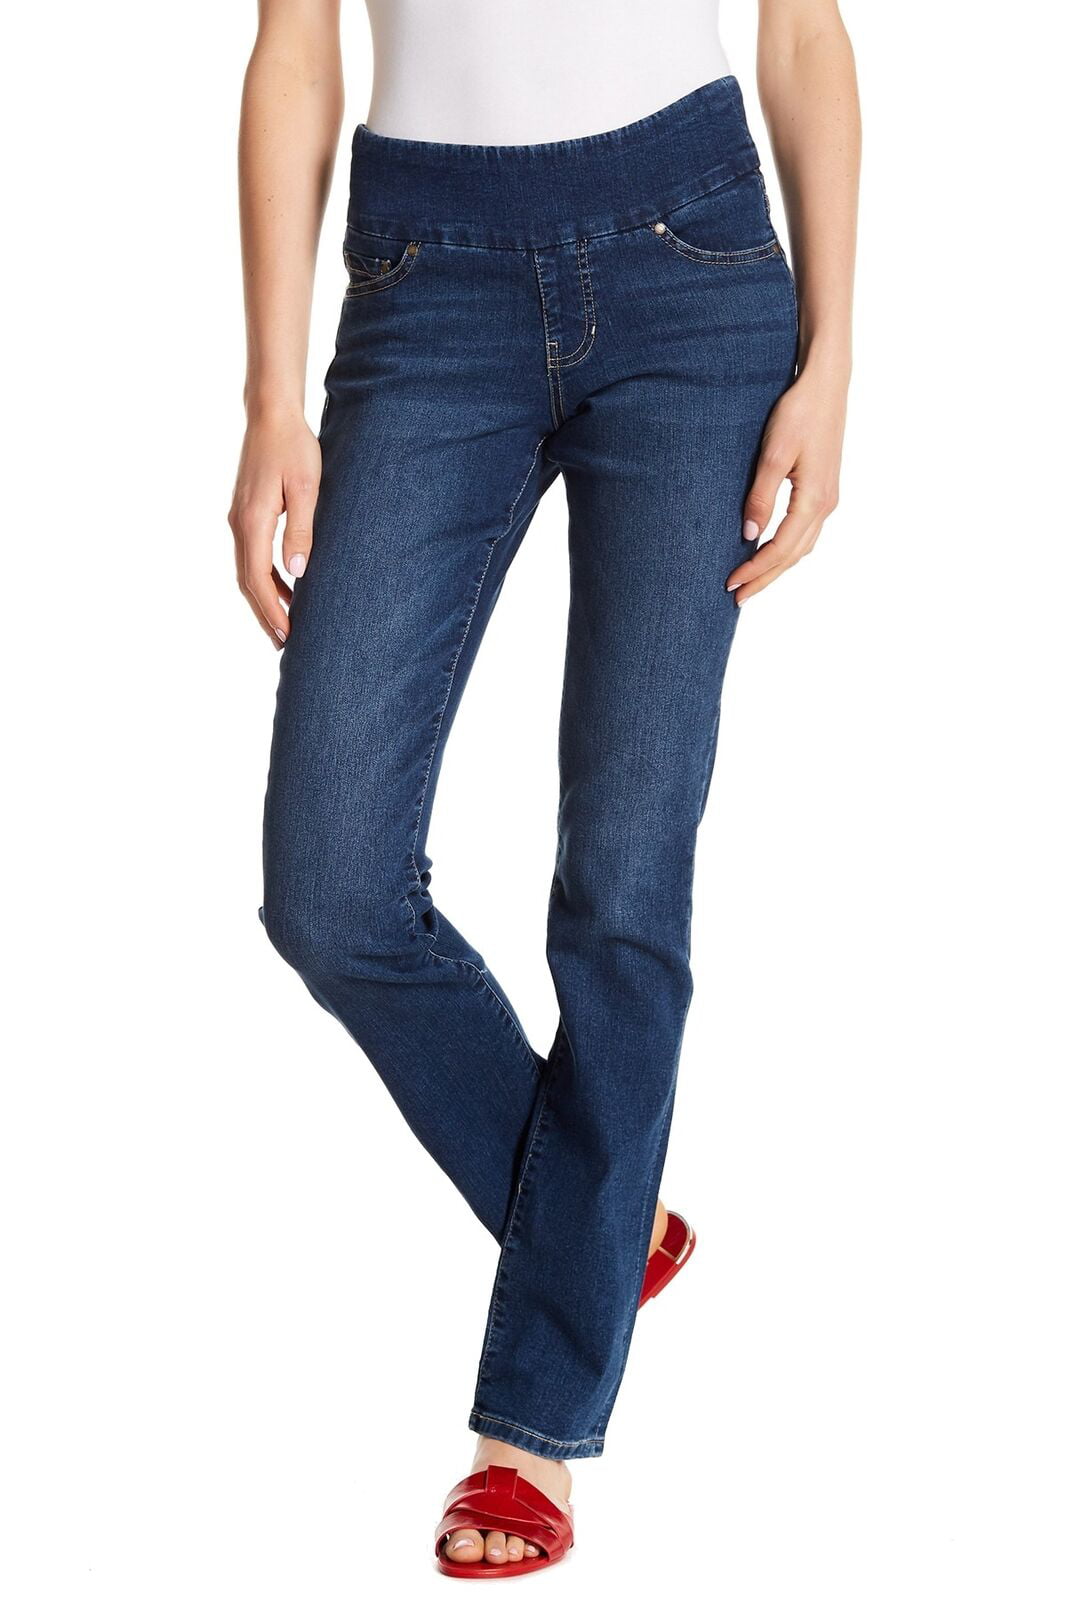 JAG Jeans - Women Jeans Pull On Straight Leg High Rise Stretch 2 ...